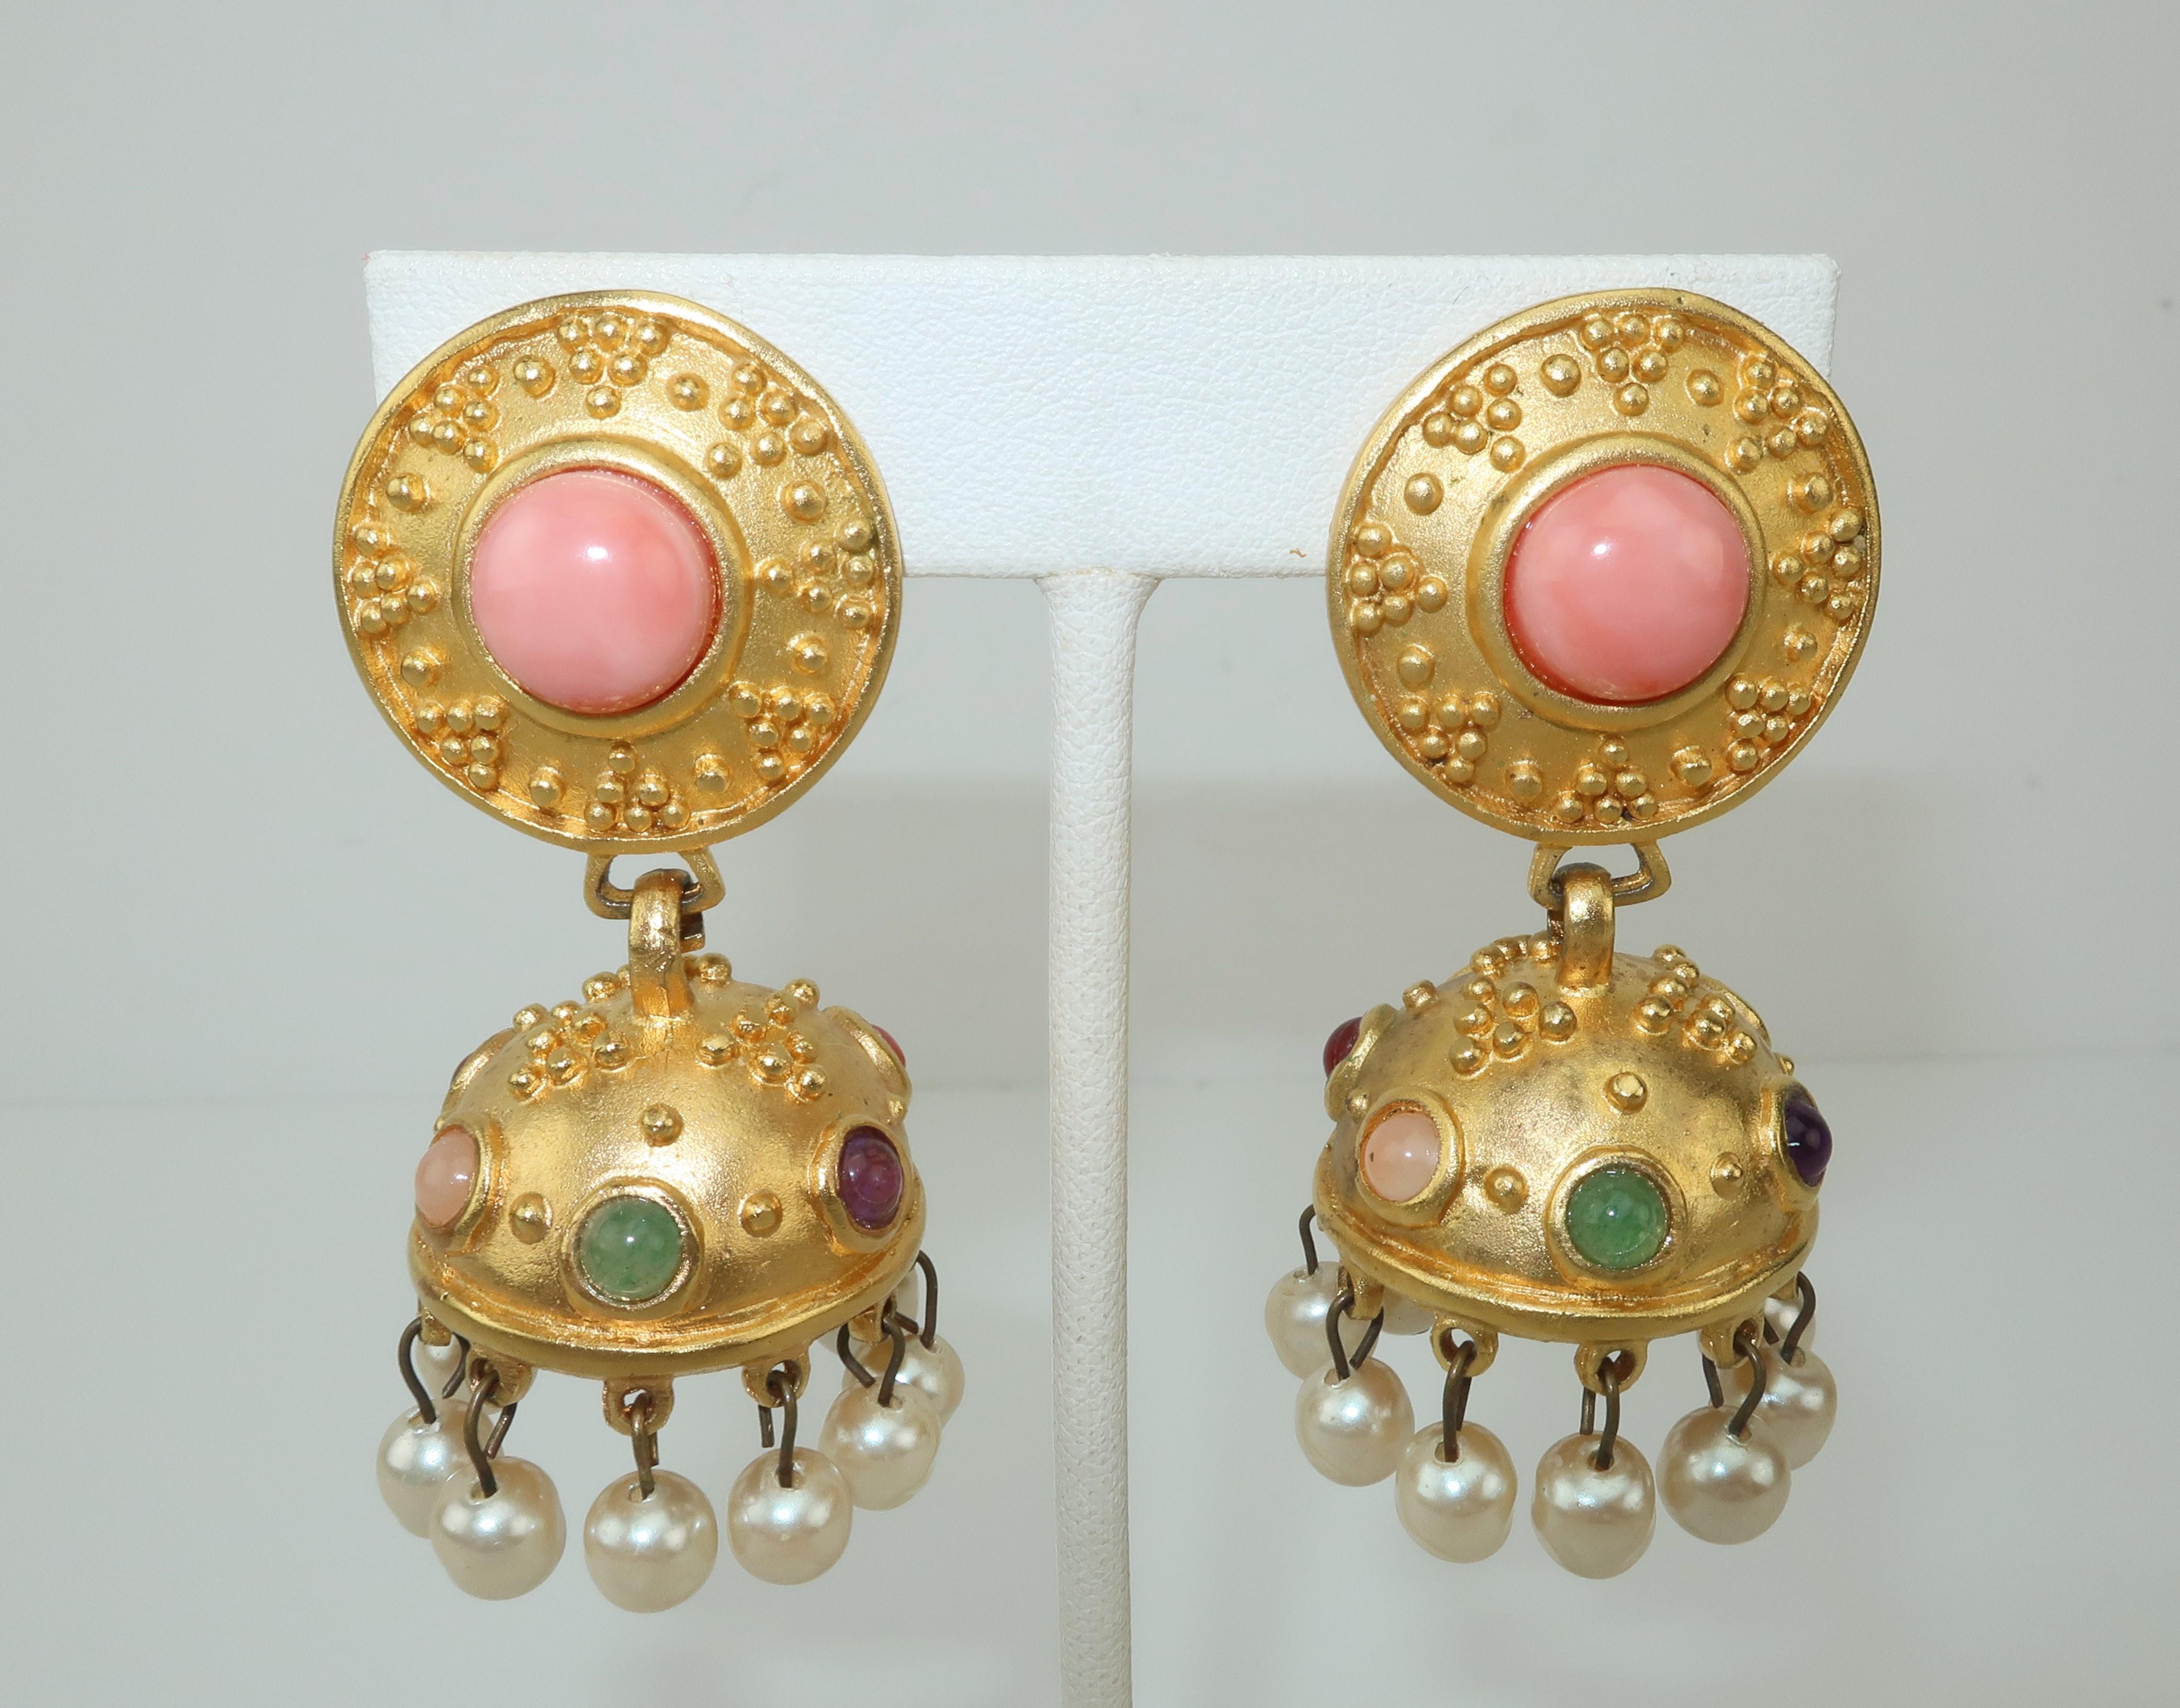 Leslie Block puts a modernist 1980's spin on an ancient jewelry design with these matte gold tone drop dangle earrings that pay homage to Etruscan, Greek and Roman styles.  Beautifully made with a beaded design to the gold finish and faux cabochon